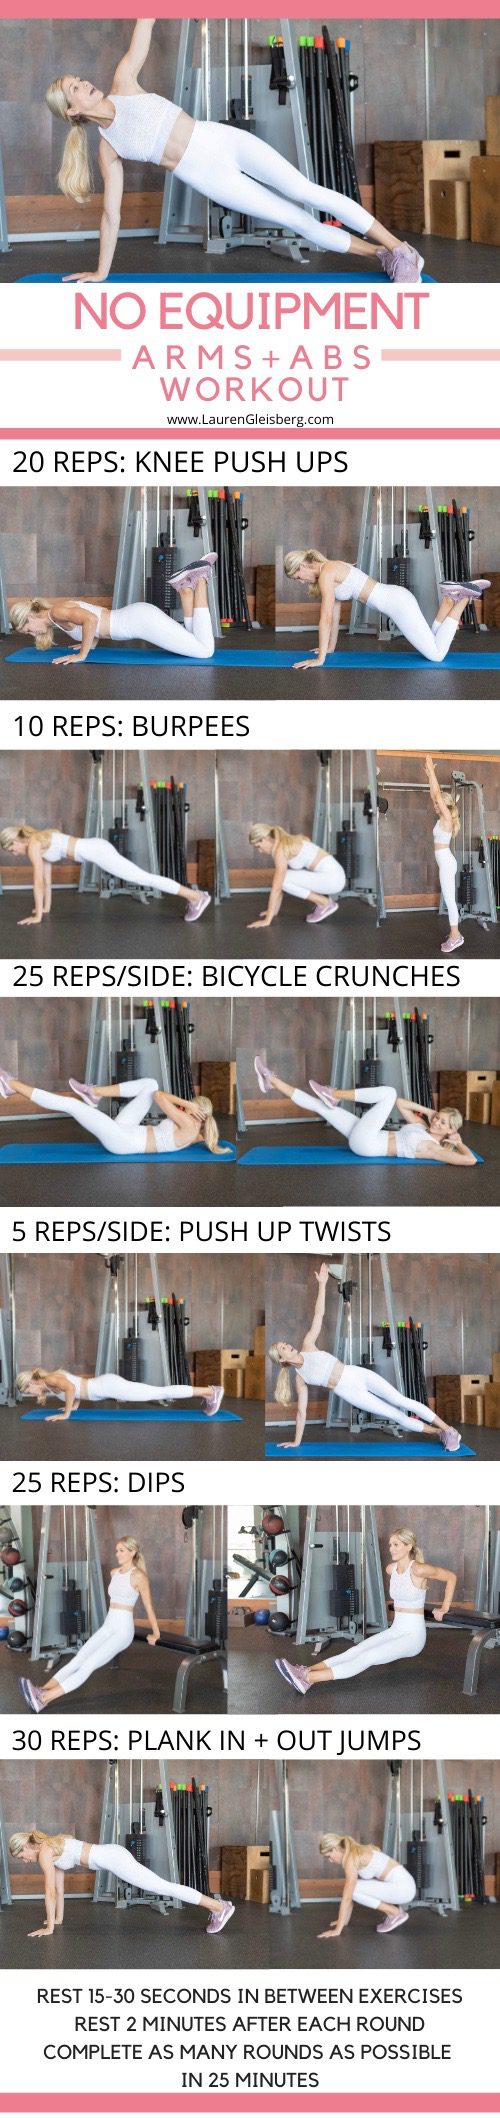 no equipment arms abs workout